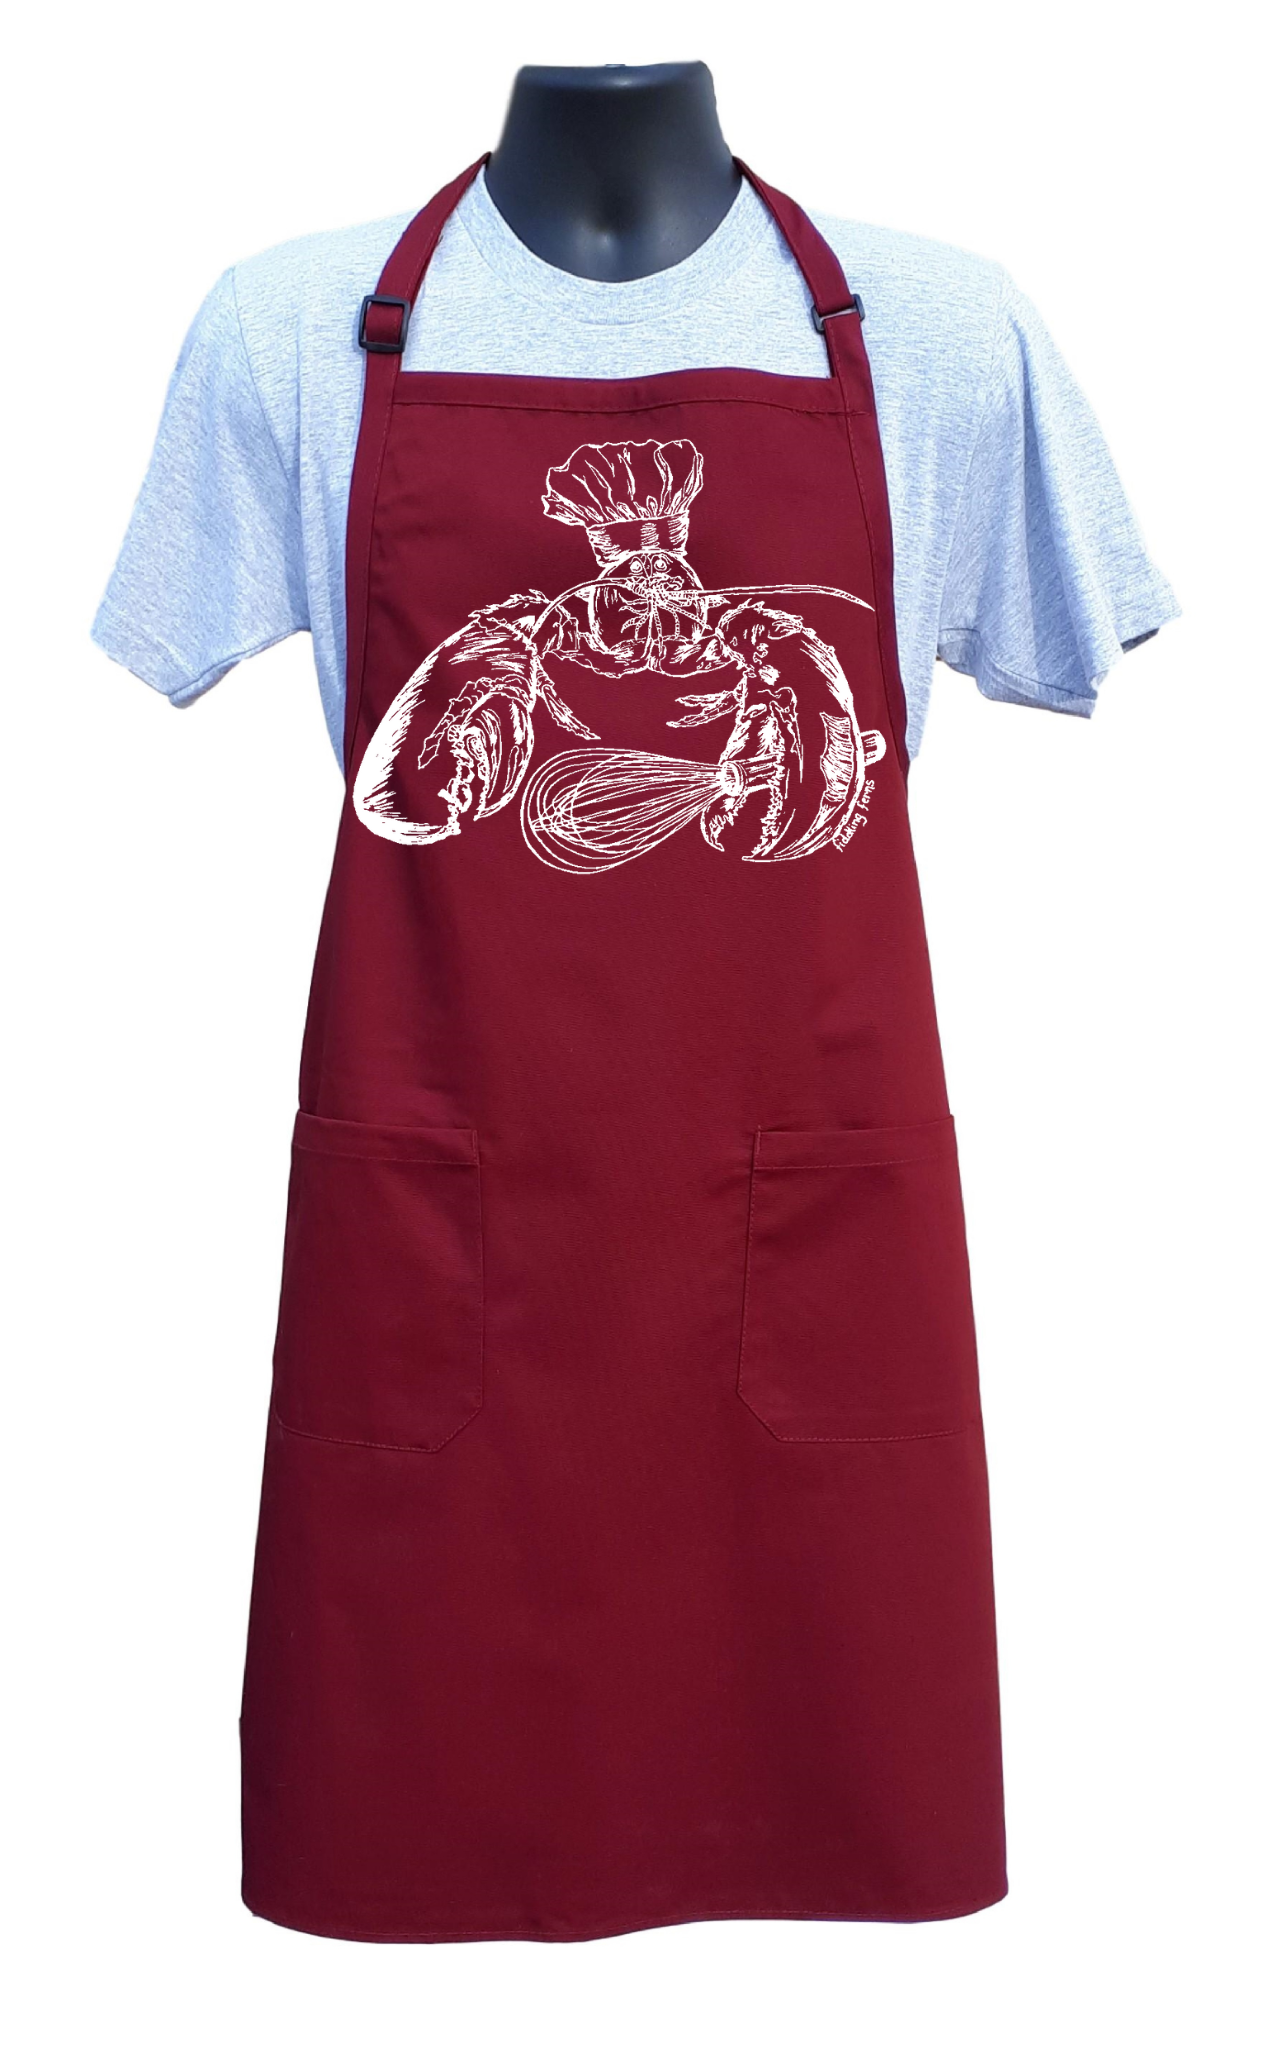 Lobster Chef Apron with Pockets